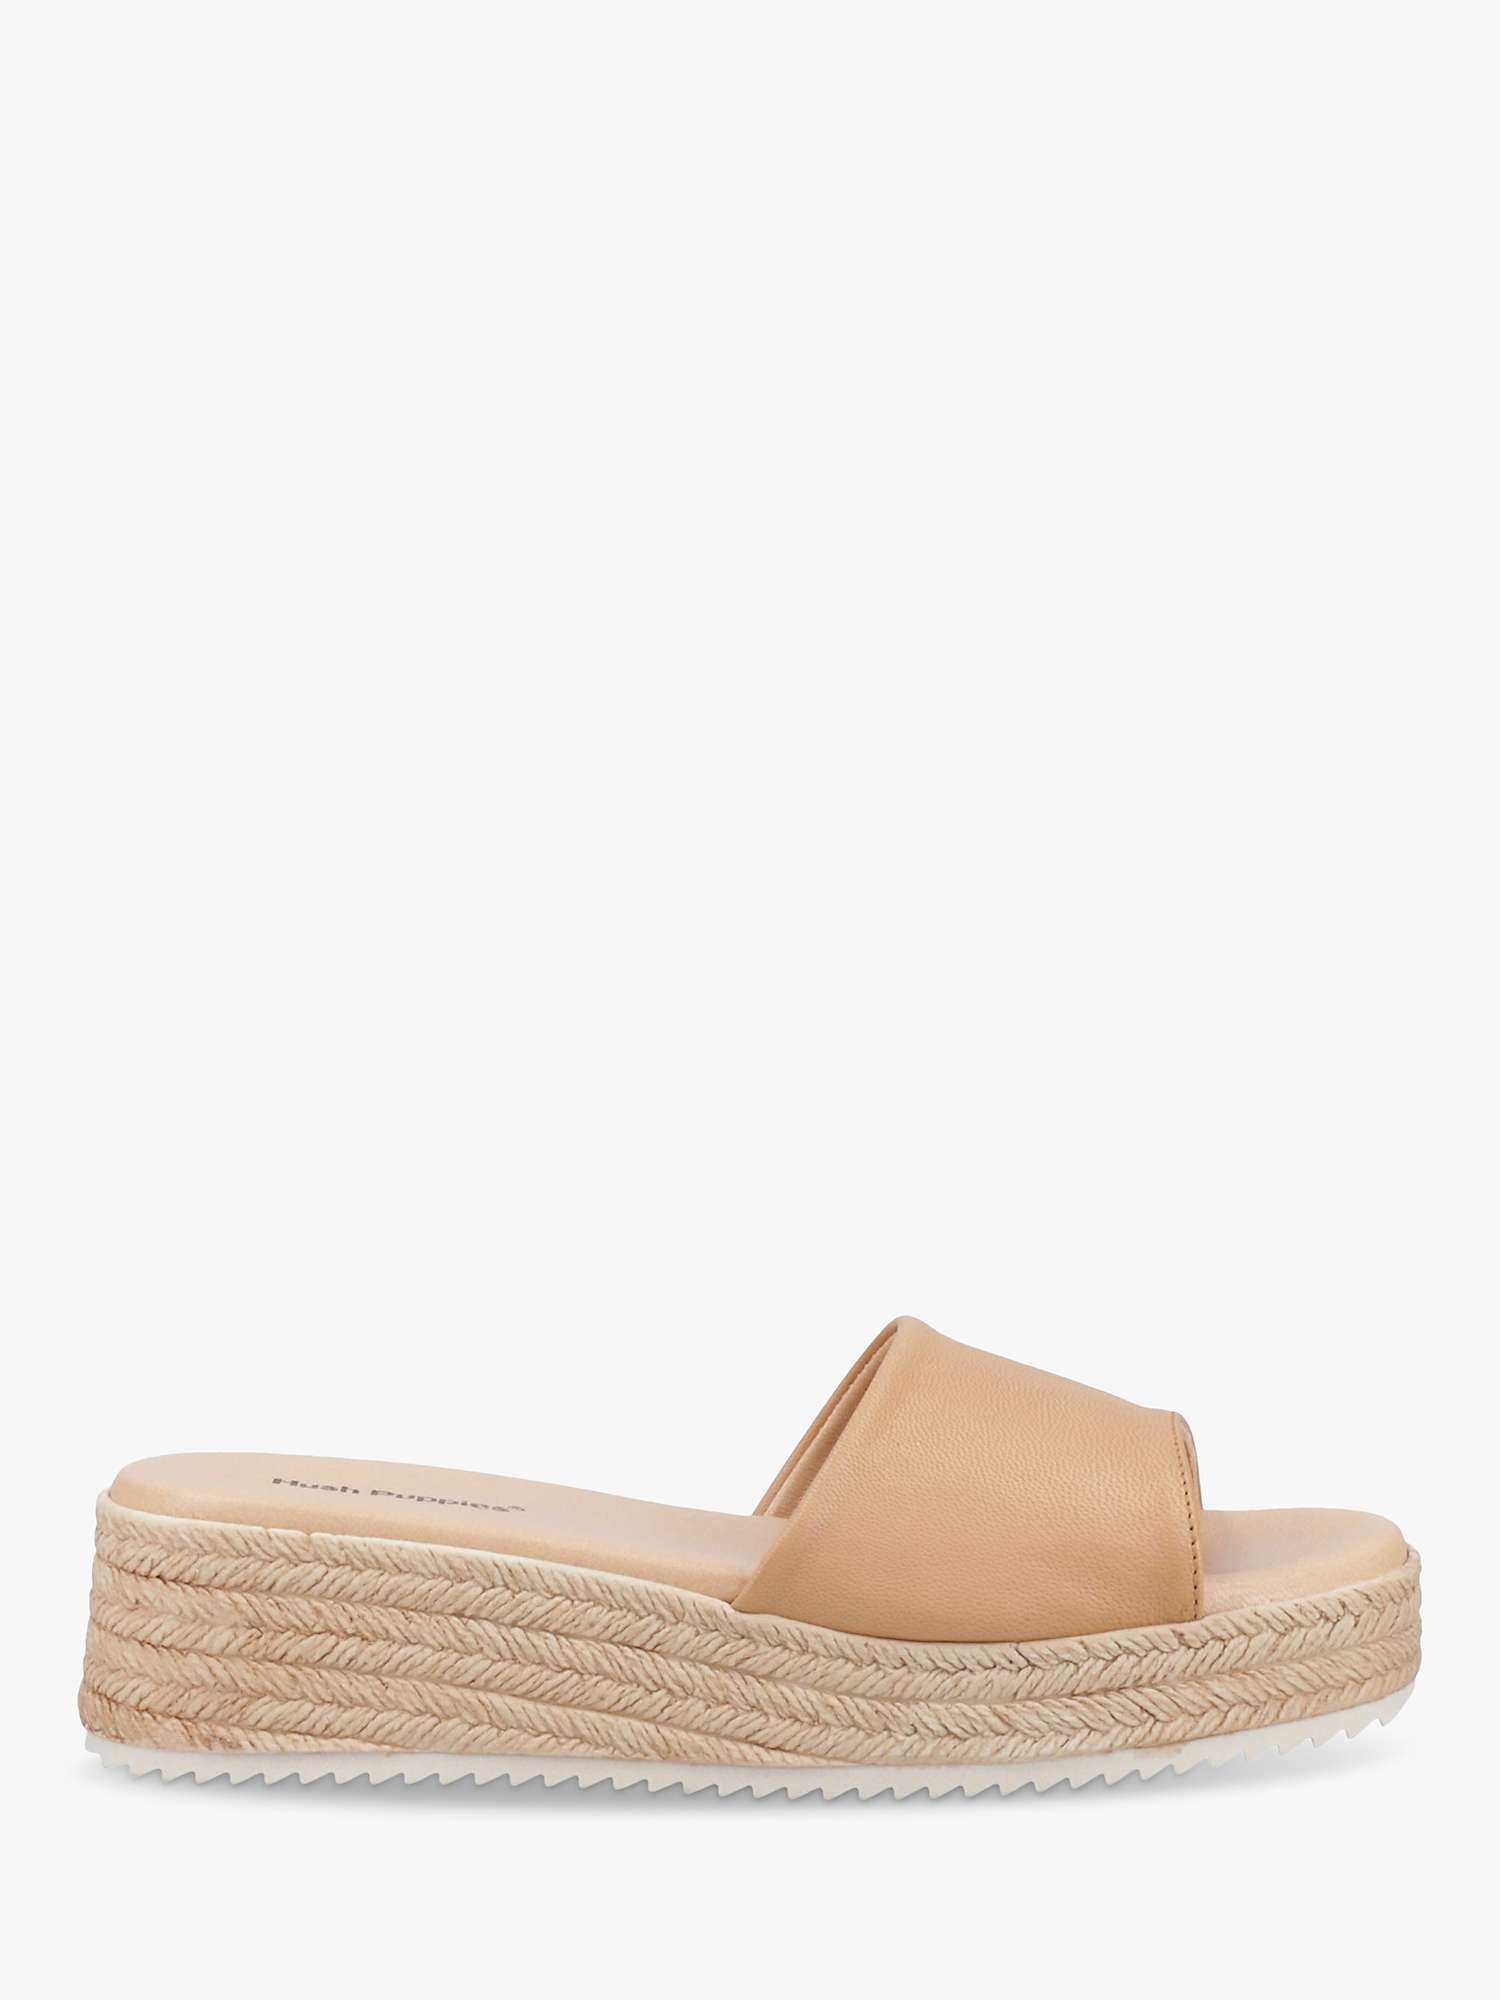 Buy Hush Puppies Robin Leather Espadrille Sliders Online at johnlewis.com